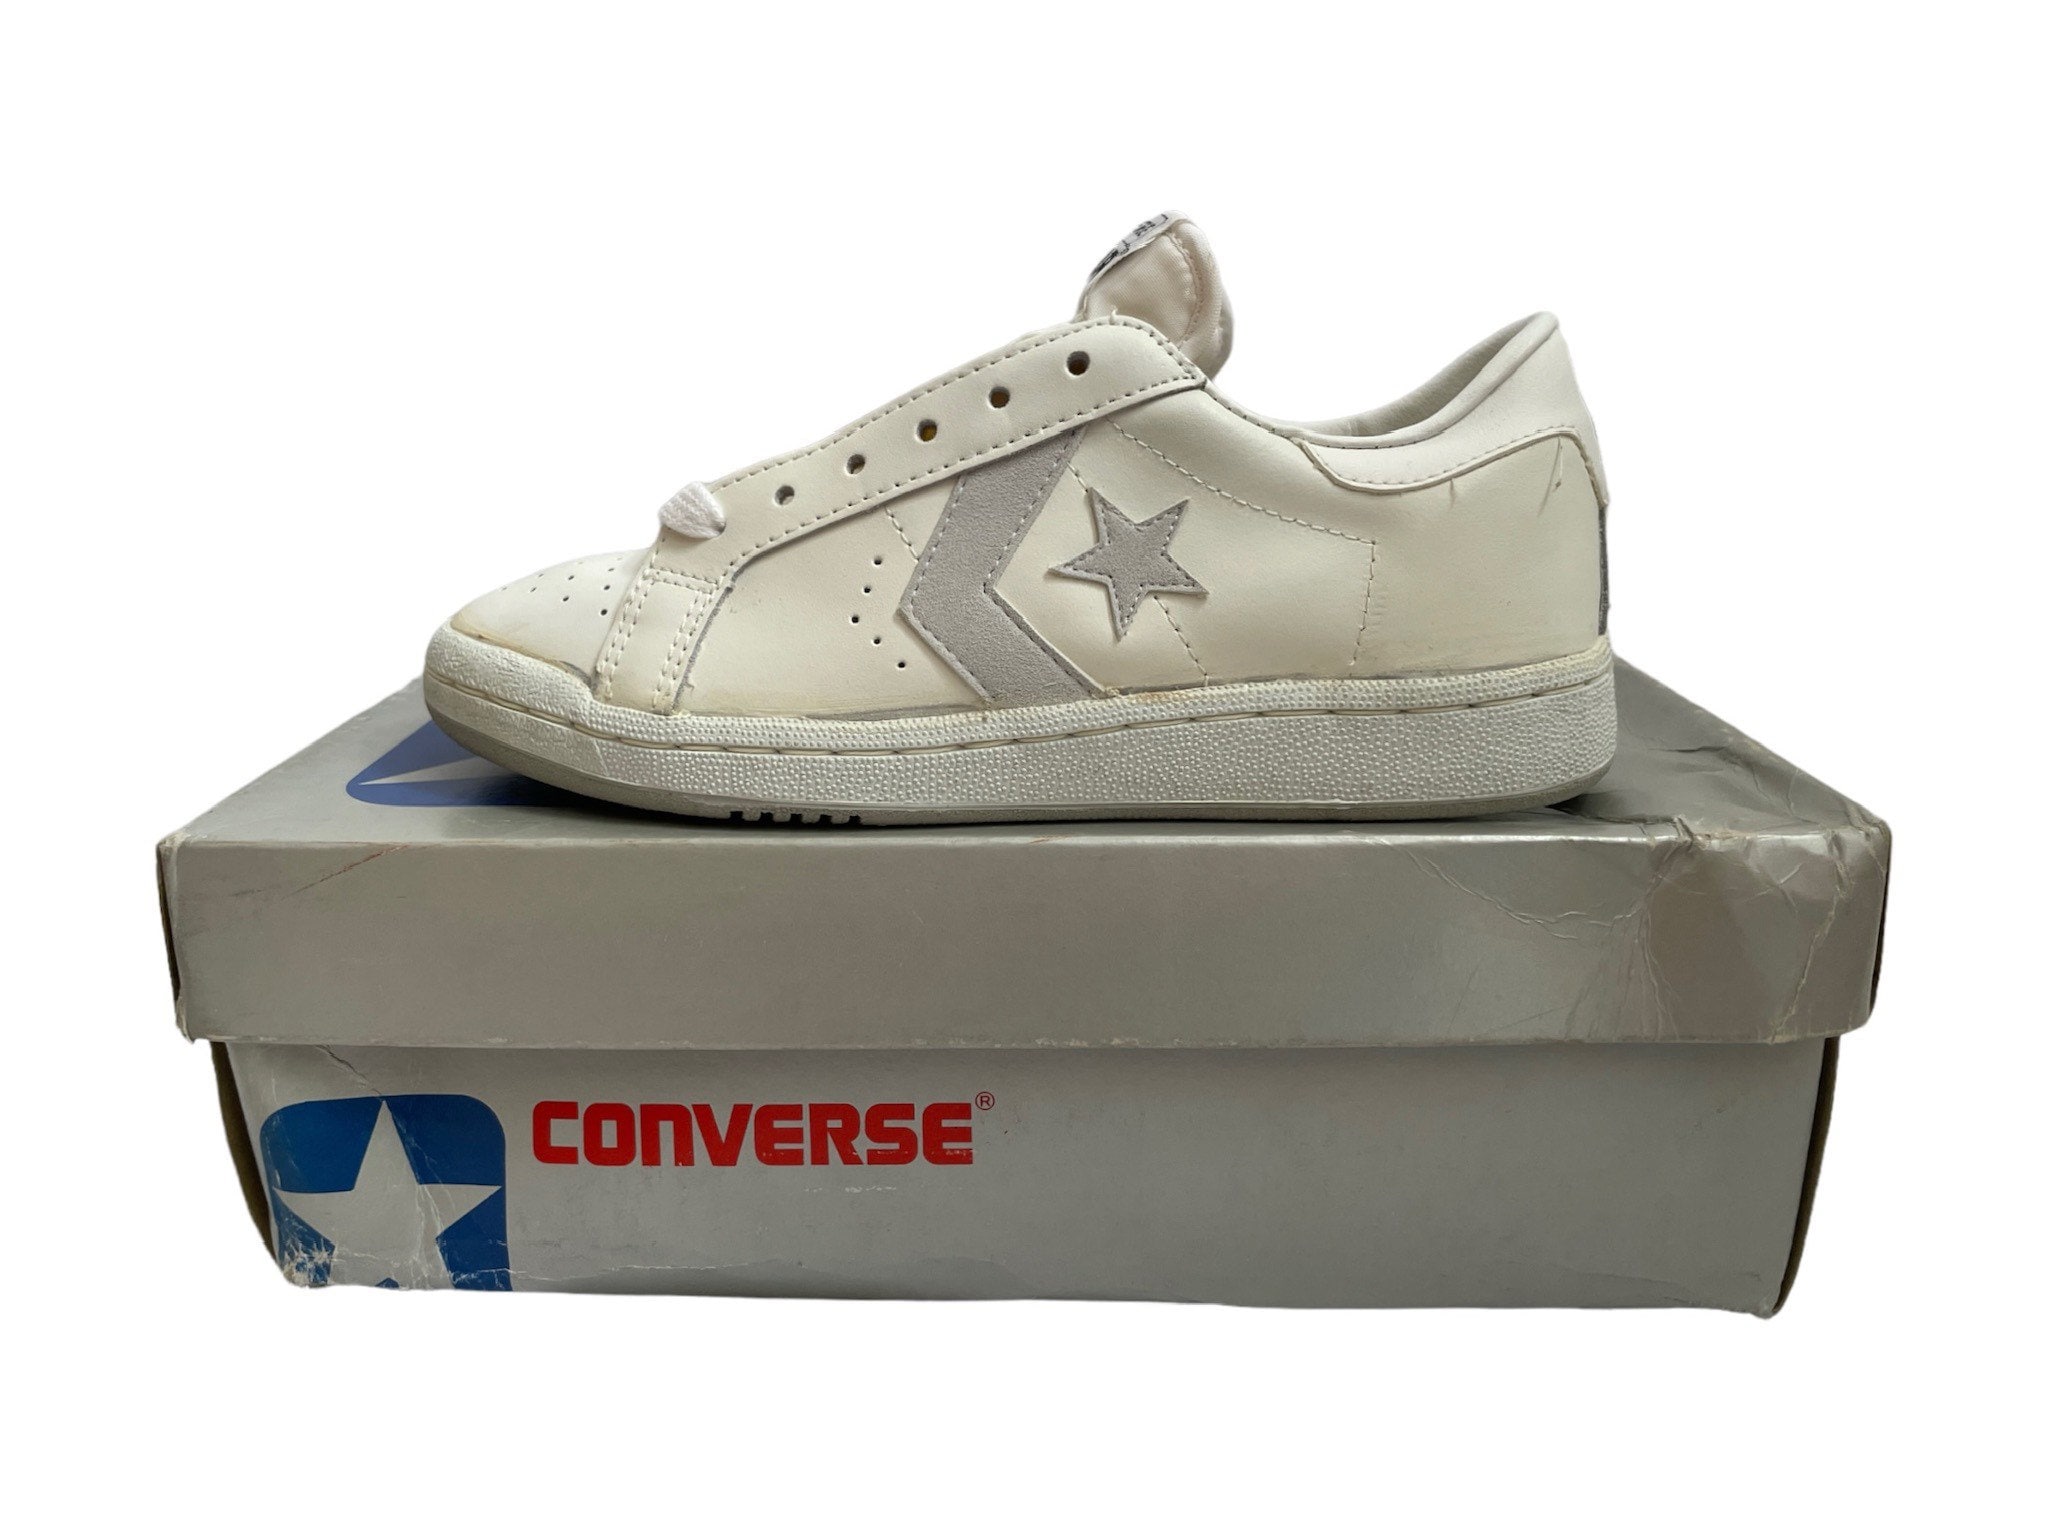 Vintage Converse Persuader Sneakers Youth Big Size - Etsy